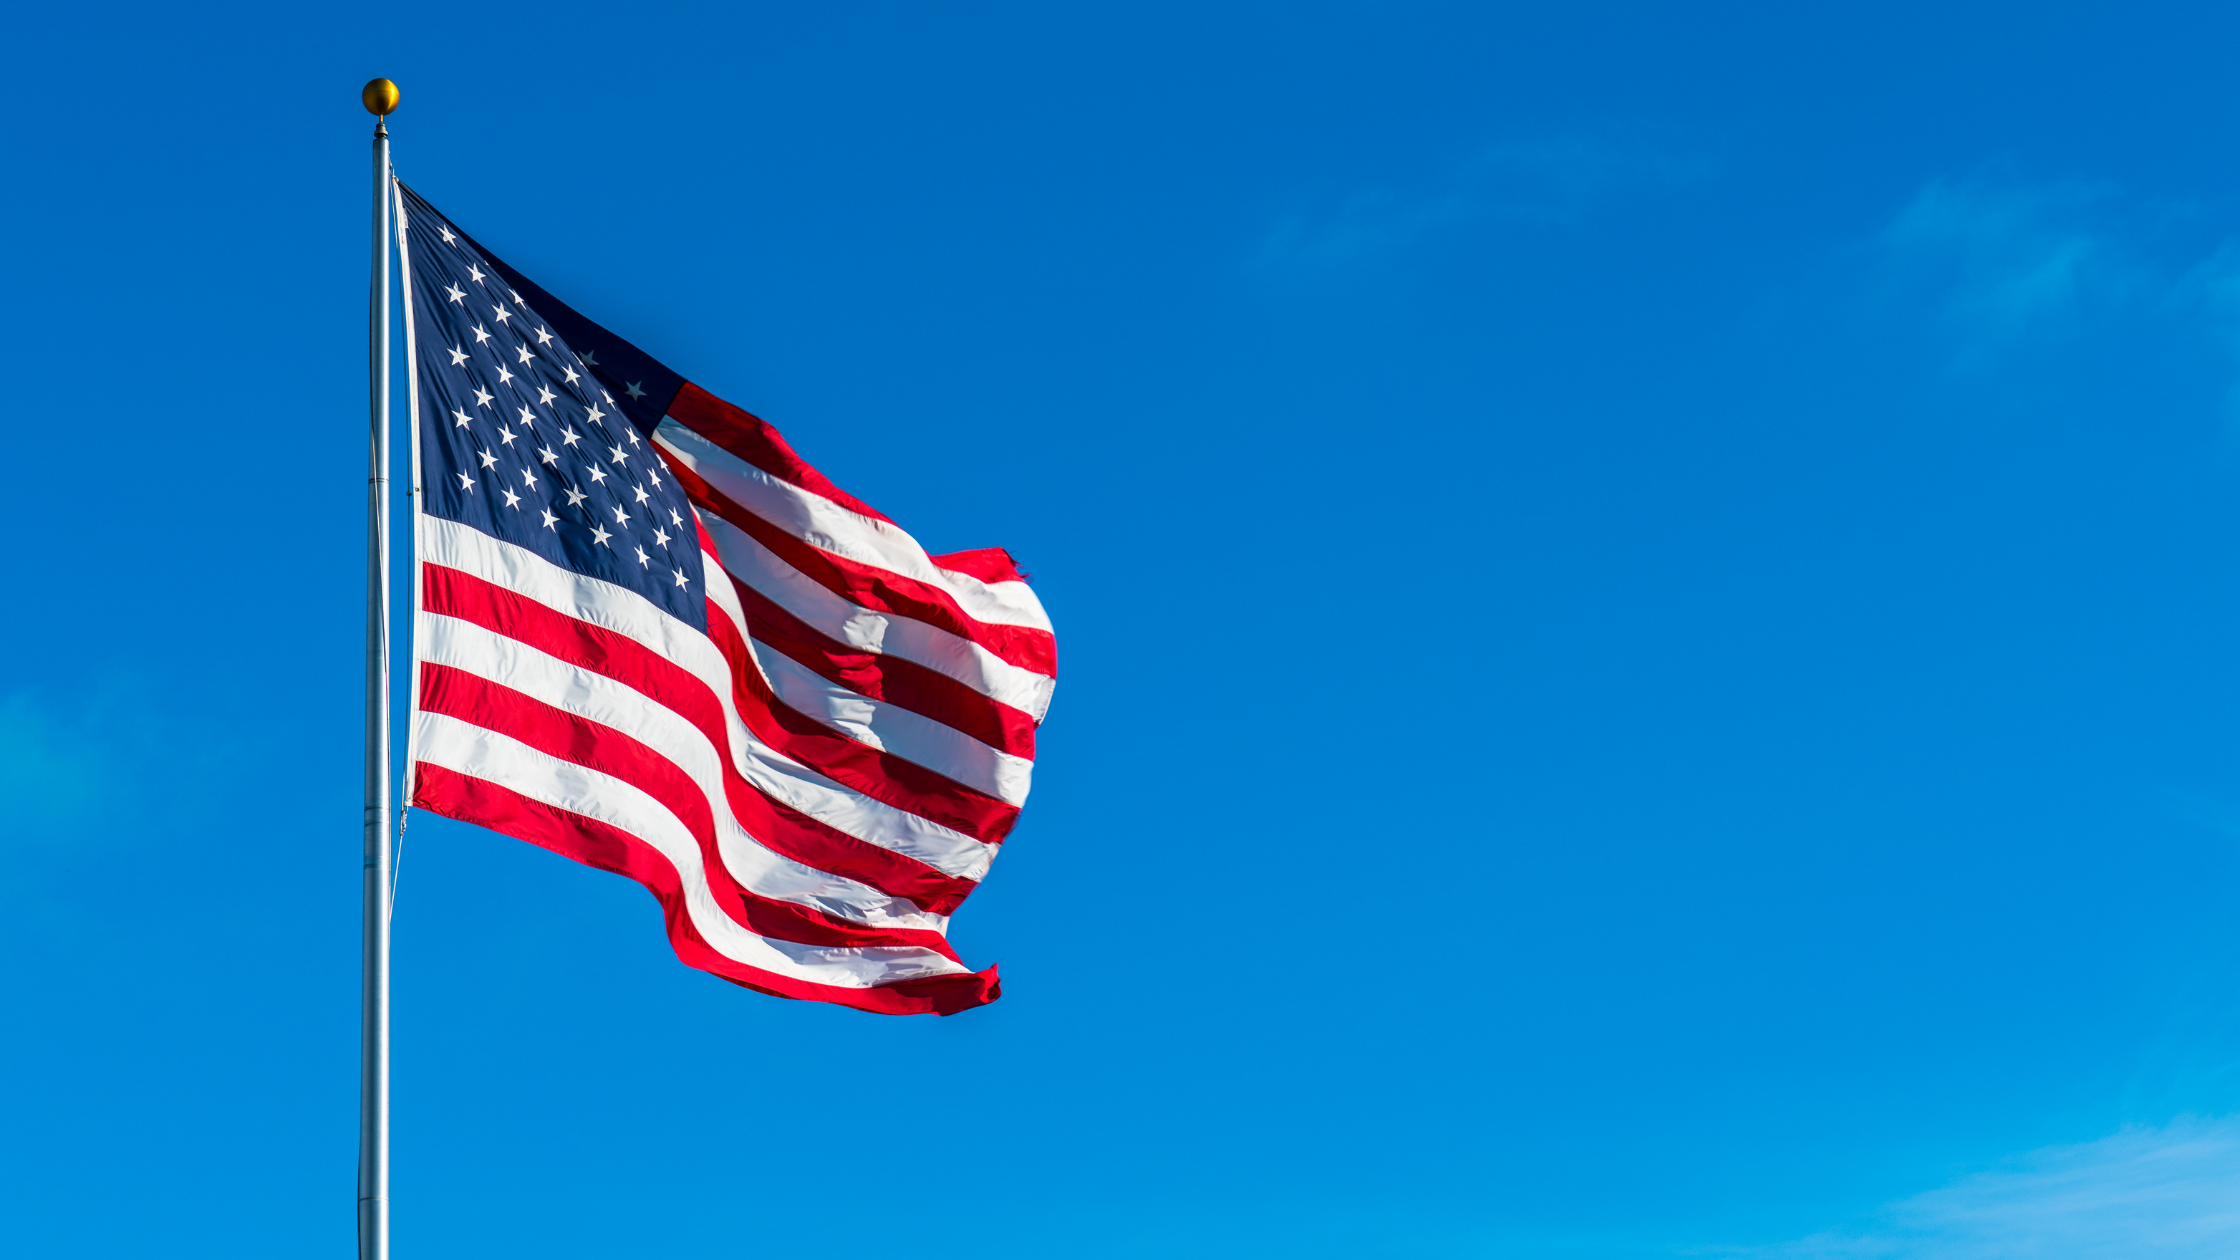 American flag flowing over blue sky